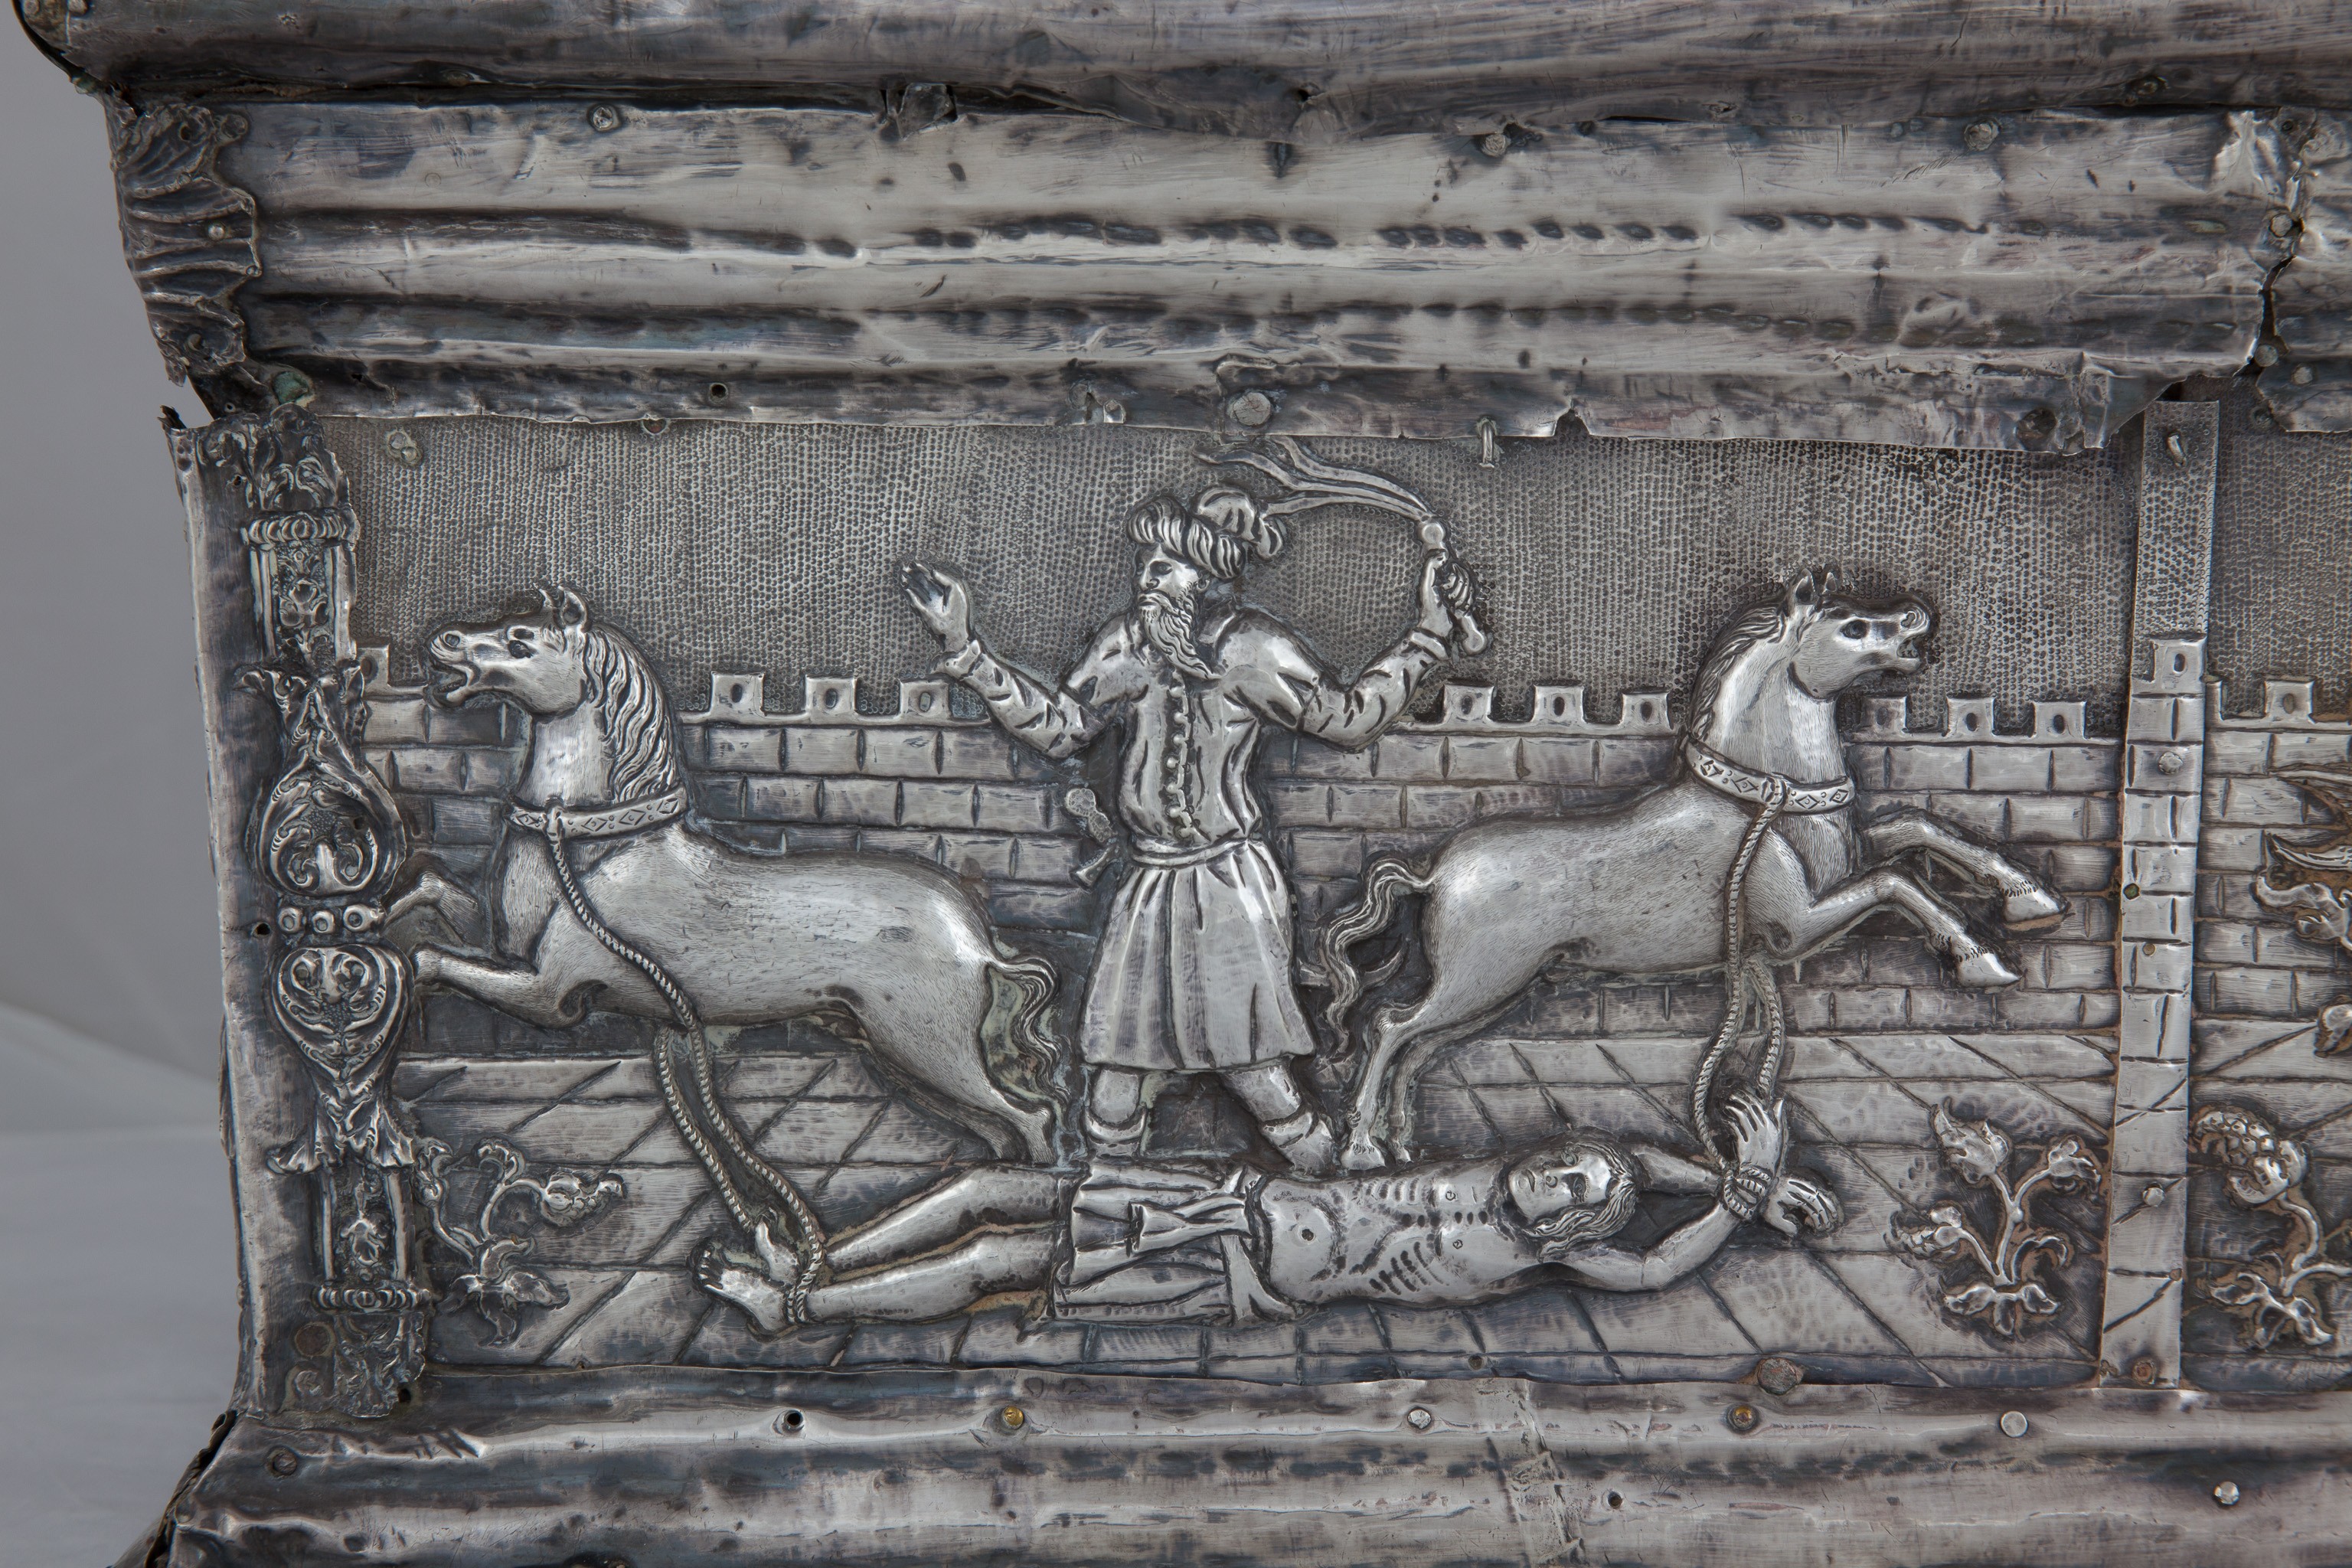 Detail of St. Tryphon drawn and quartered by horses, Reliquary Casket of St. Tryphon, ca. 1539, Cathedral of St. Tryphon, Kotor (source: S. Kordić)